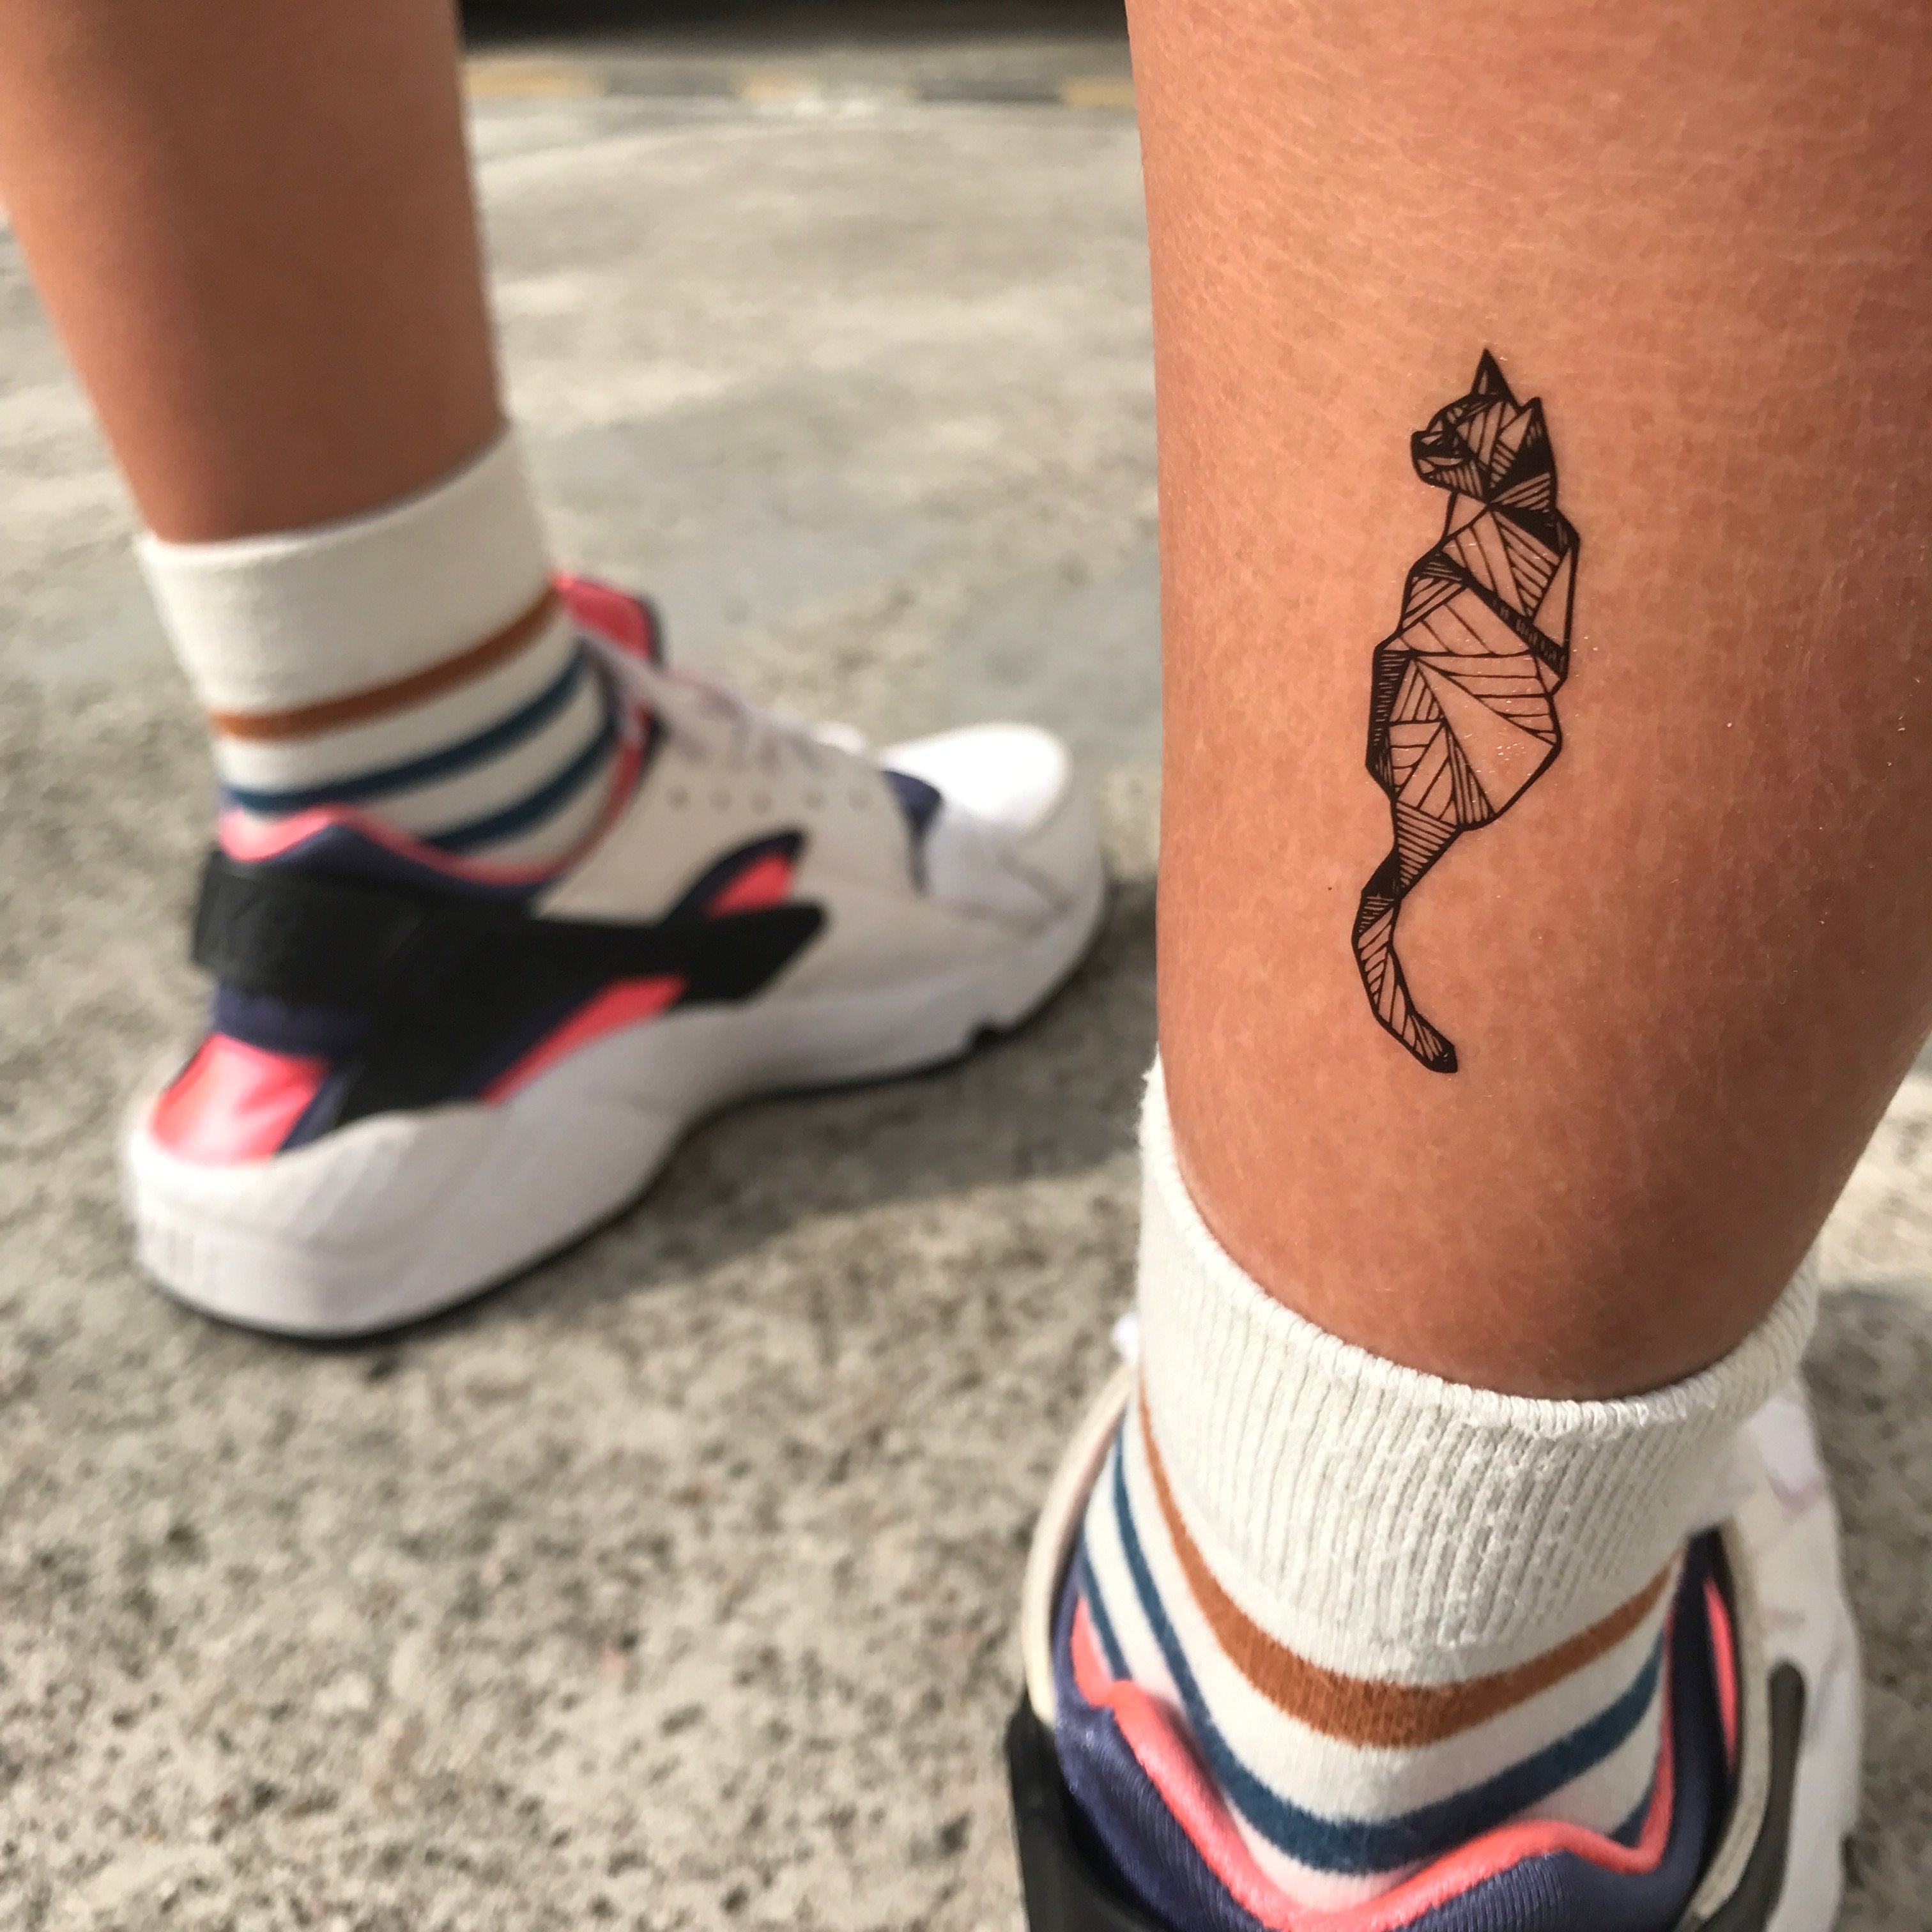 This Artist Created 30 Tattoos That Look Like Stickers That Would Peel  Right Off Your Skin | Bored Panda